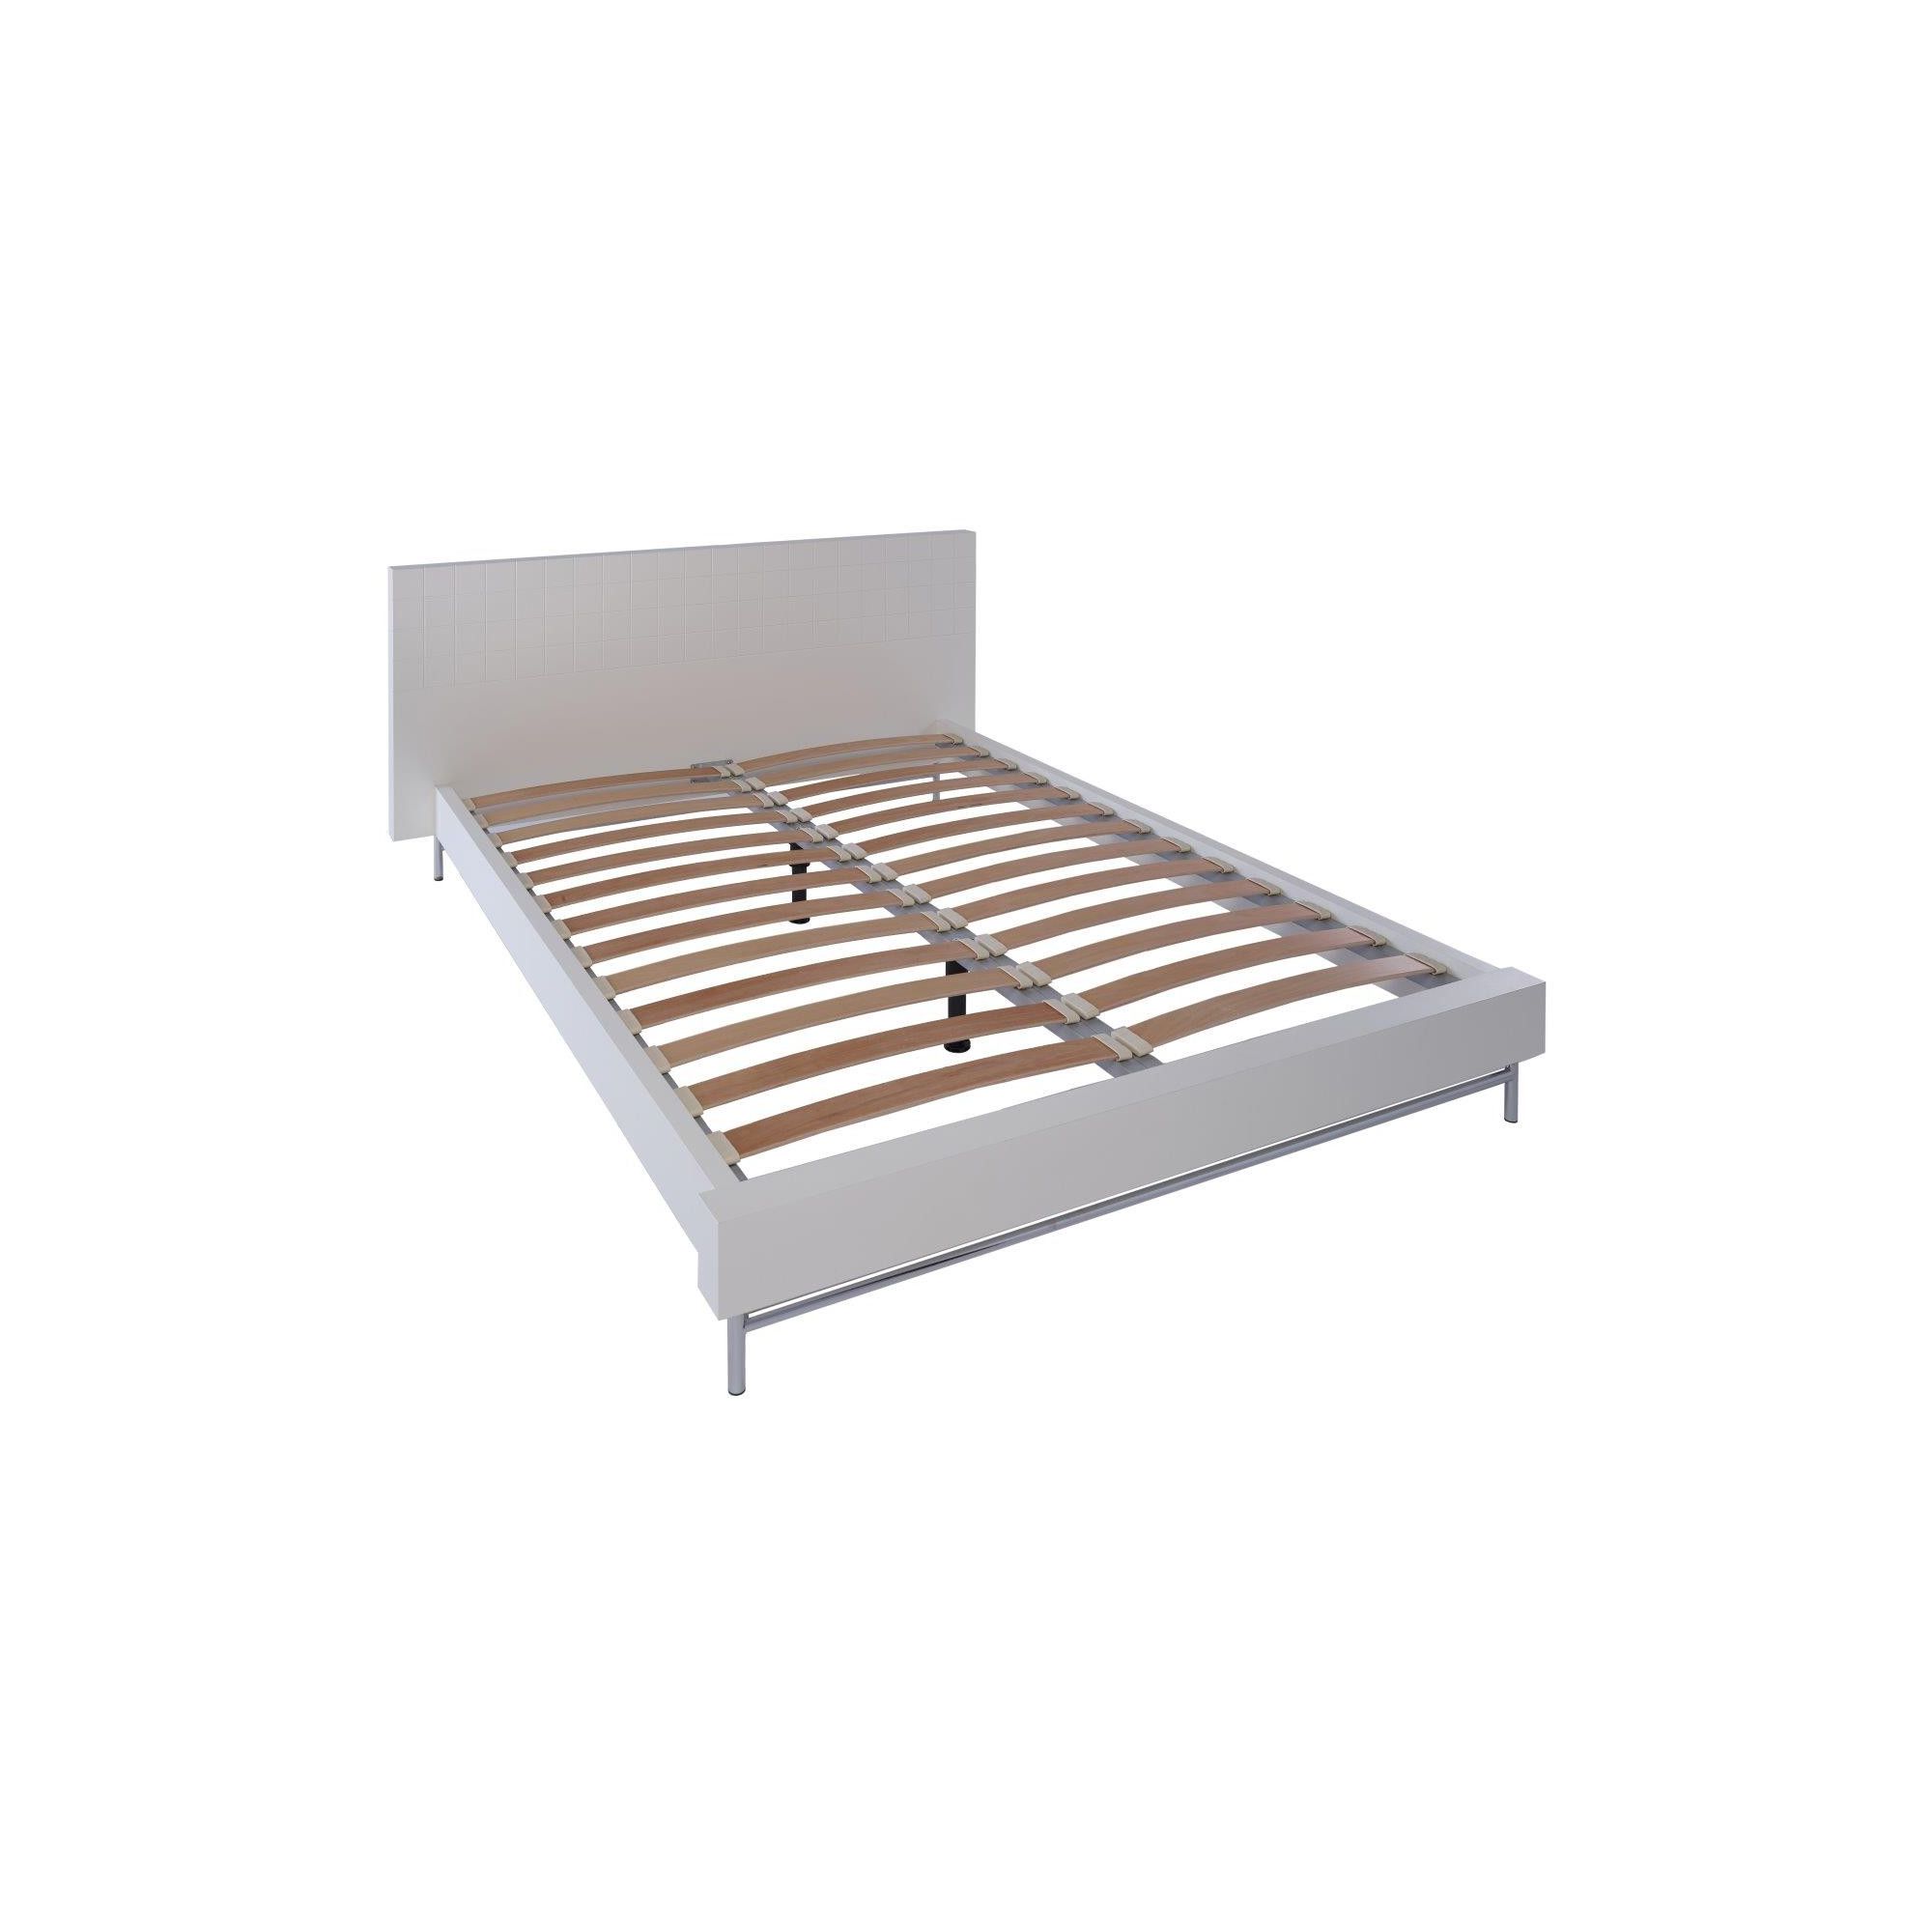 Gillmore Space Barcelona Bed - King - Walnut at Tescos Direct